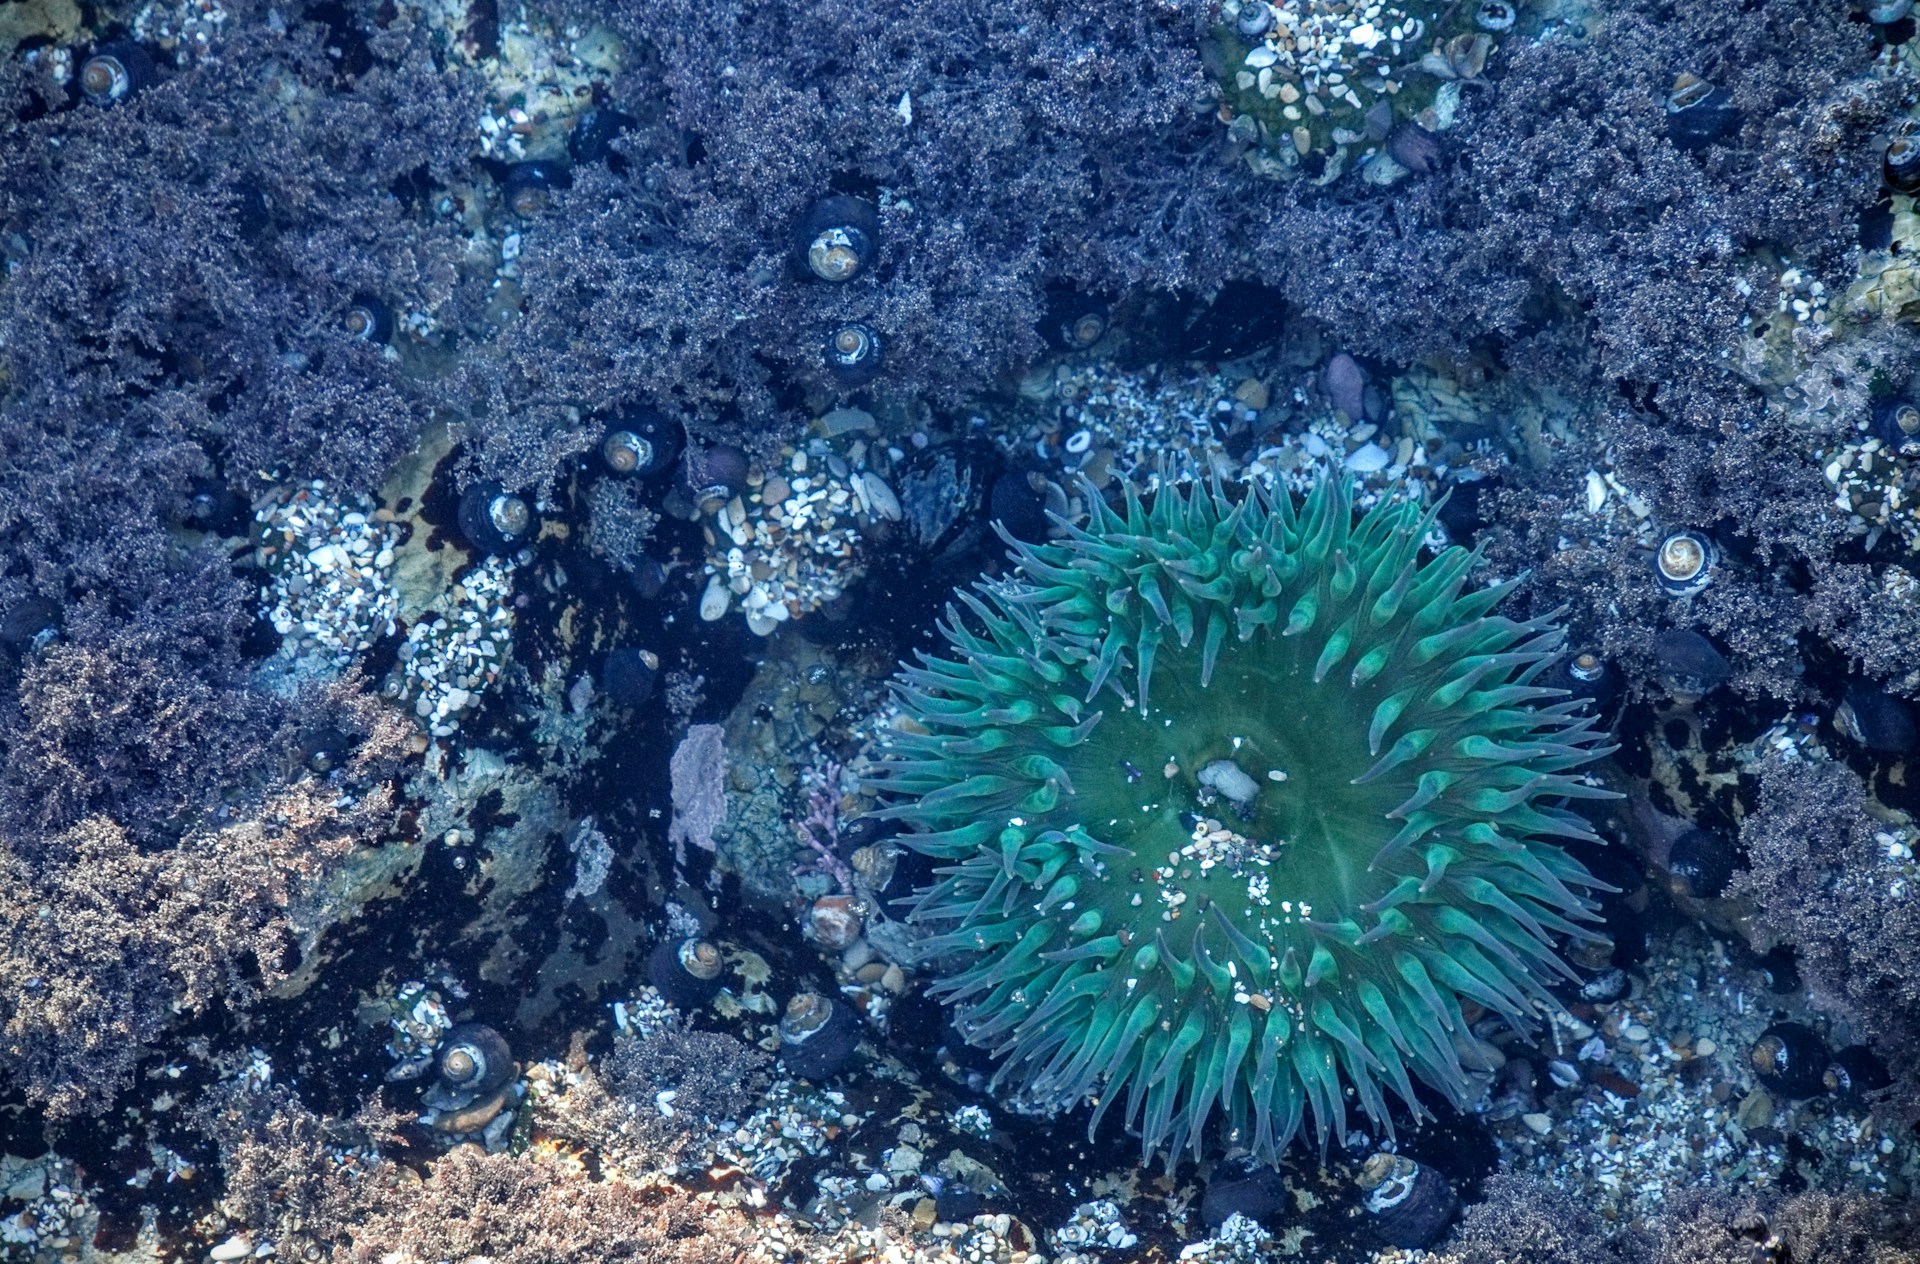 A blue sea urchin and coral